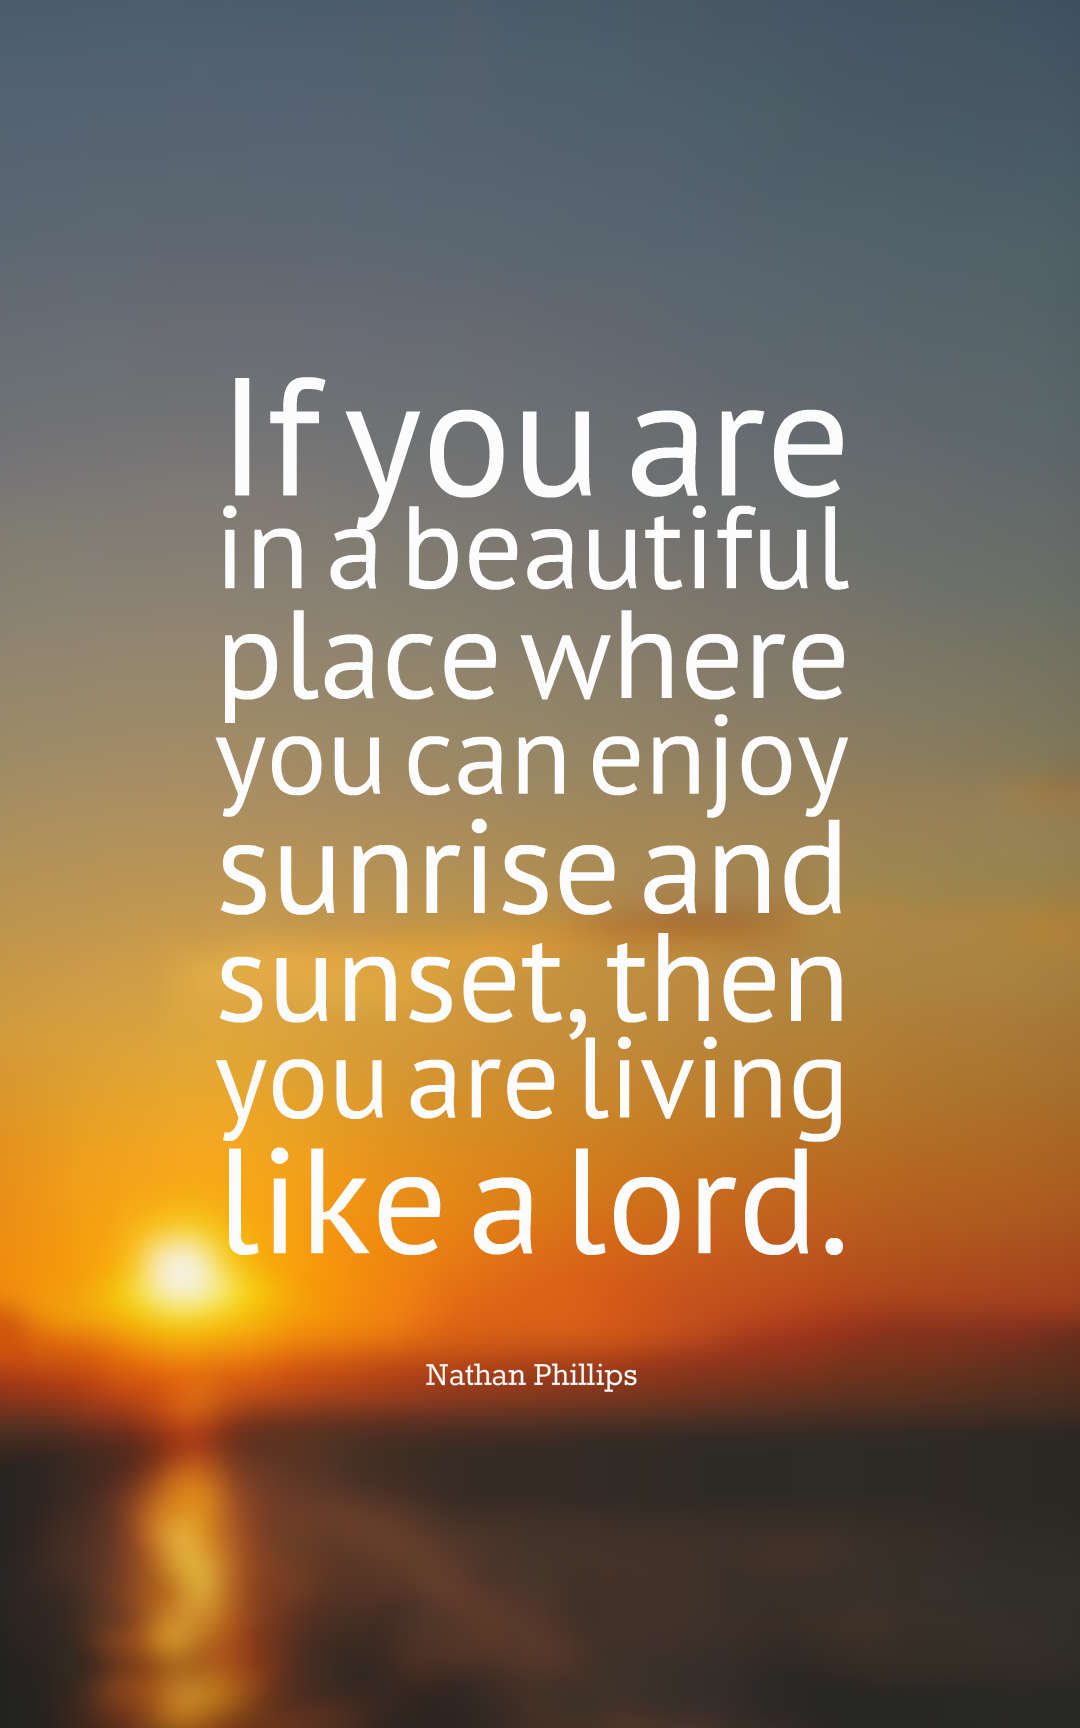 If you are in a beautiful place where you can enjoy sunrise and sunset, then you are living like a lord.